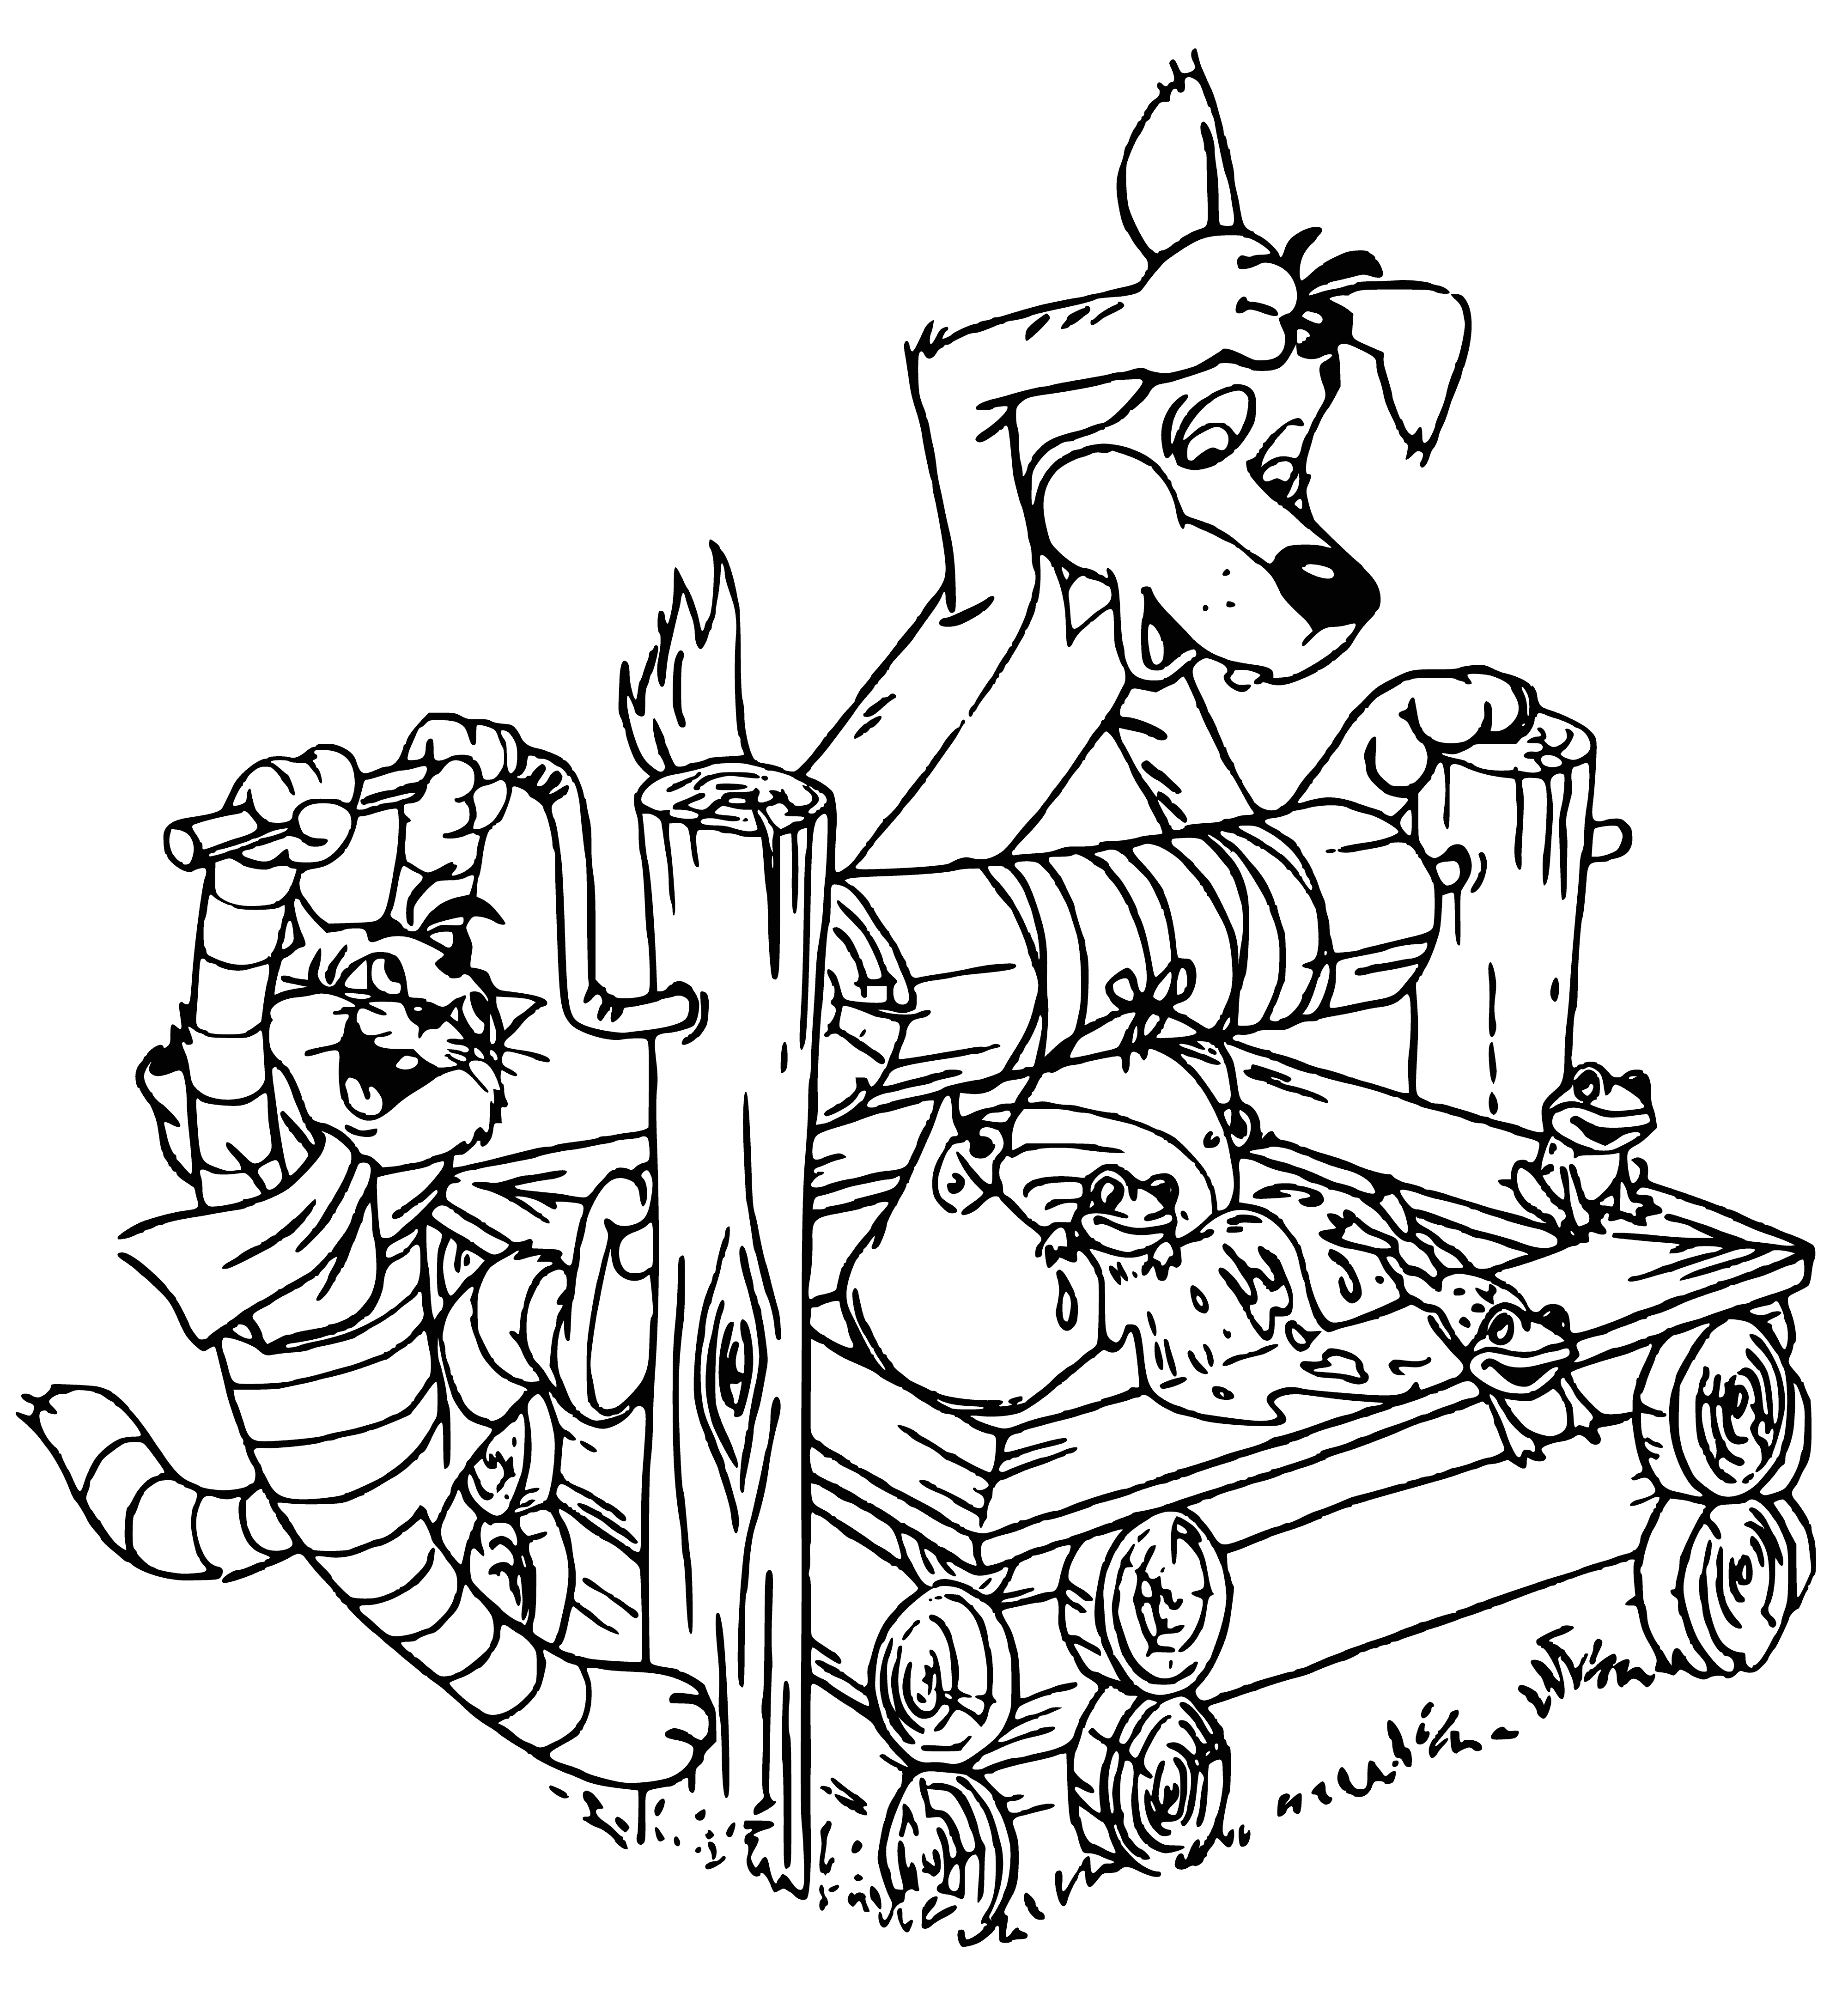 coloring page: Three green frogs in a stone well, conversing and staring ahead.